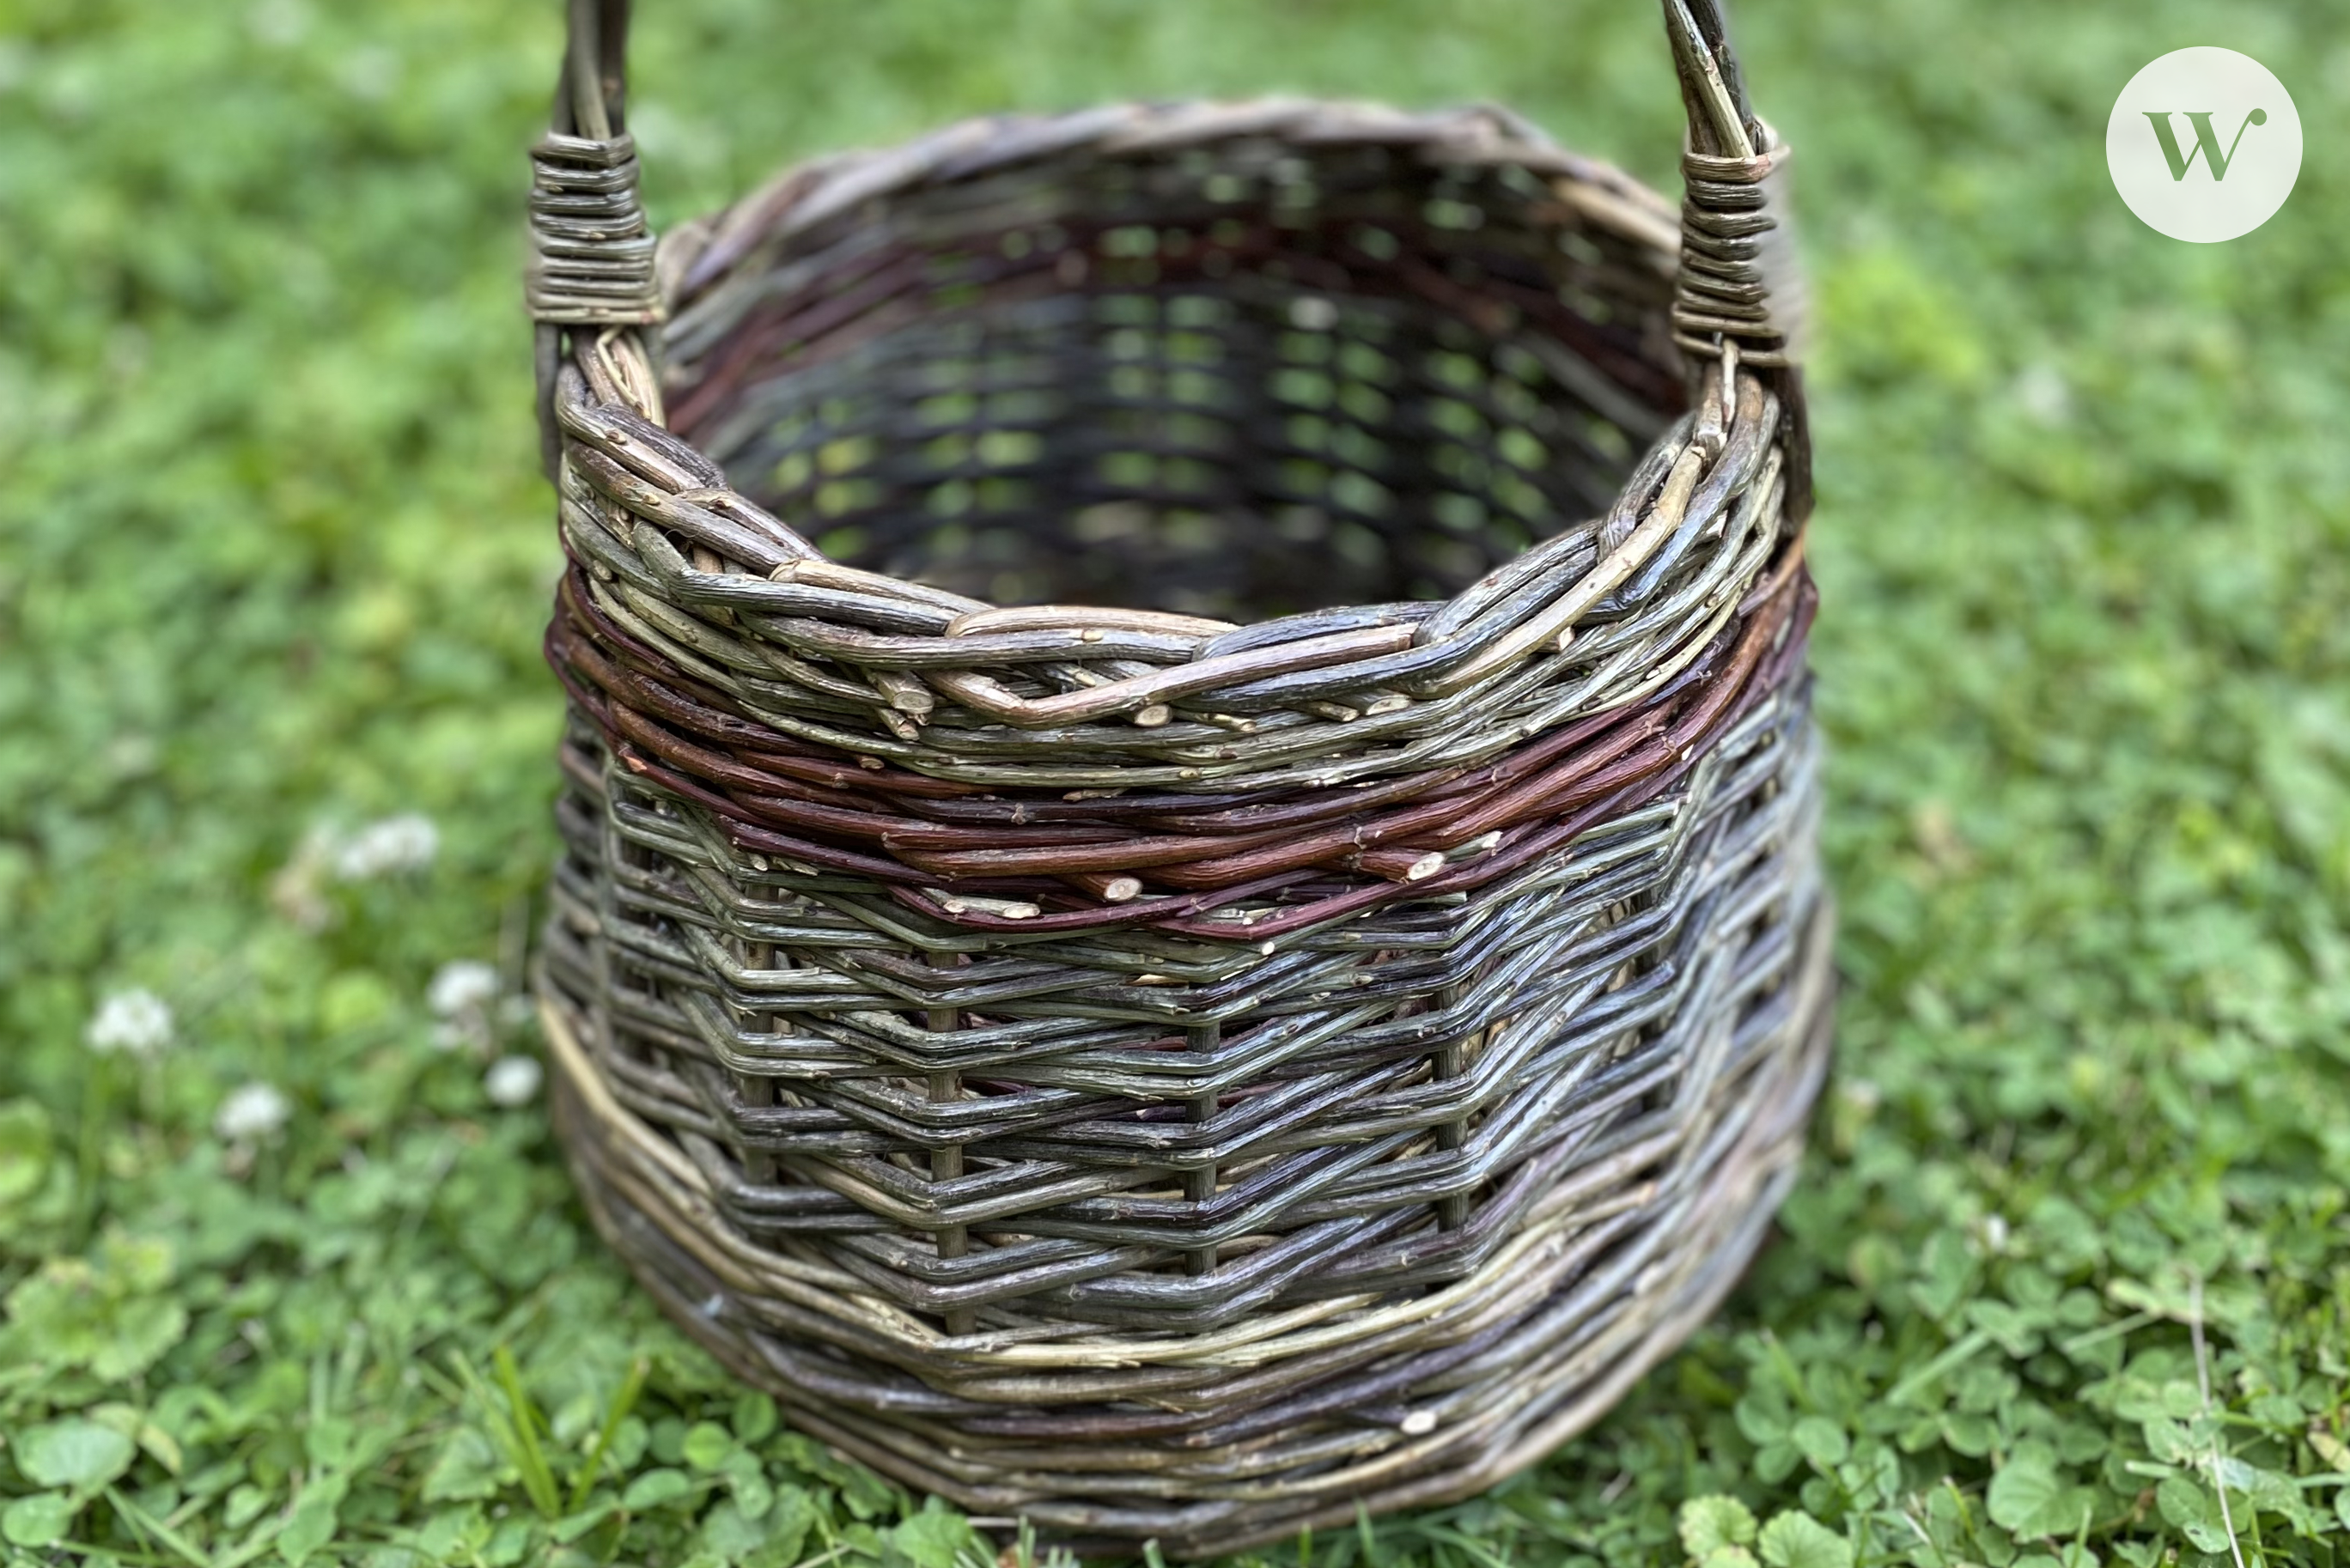 A photograph of a woven basket outside on the grass.